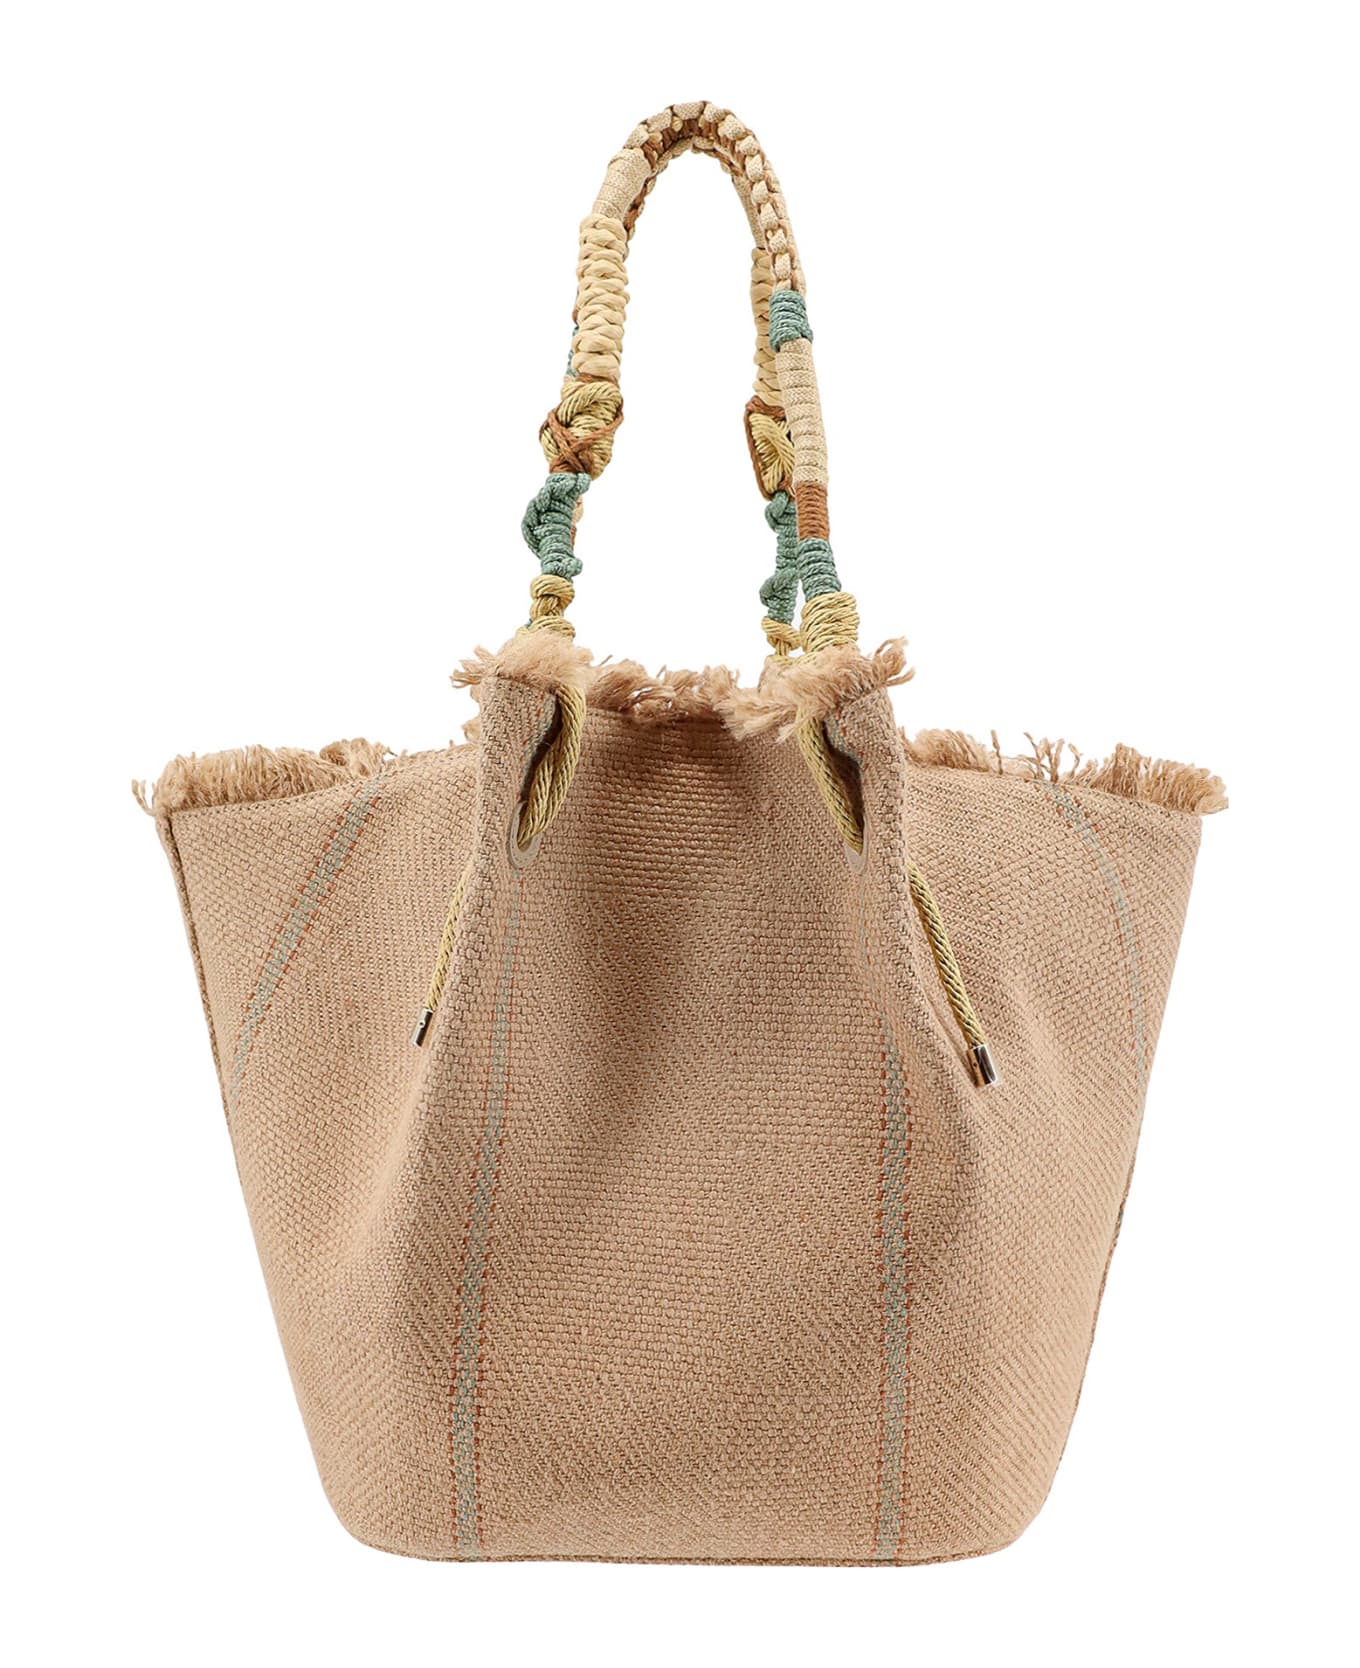 Christian Louboutin By My Side Top Handle Bag - Beige